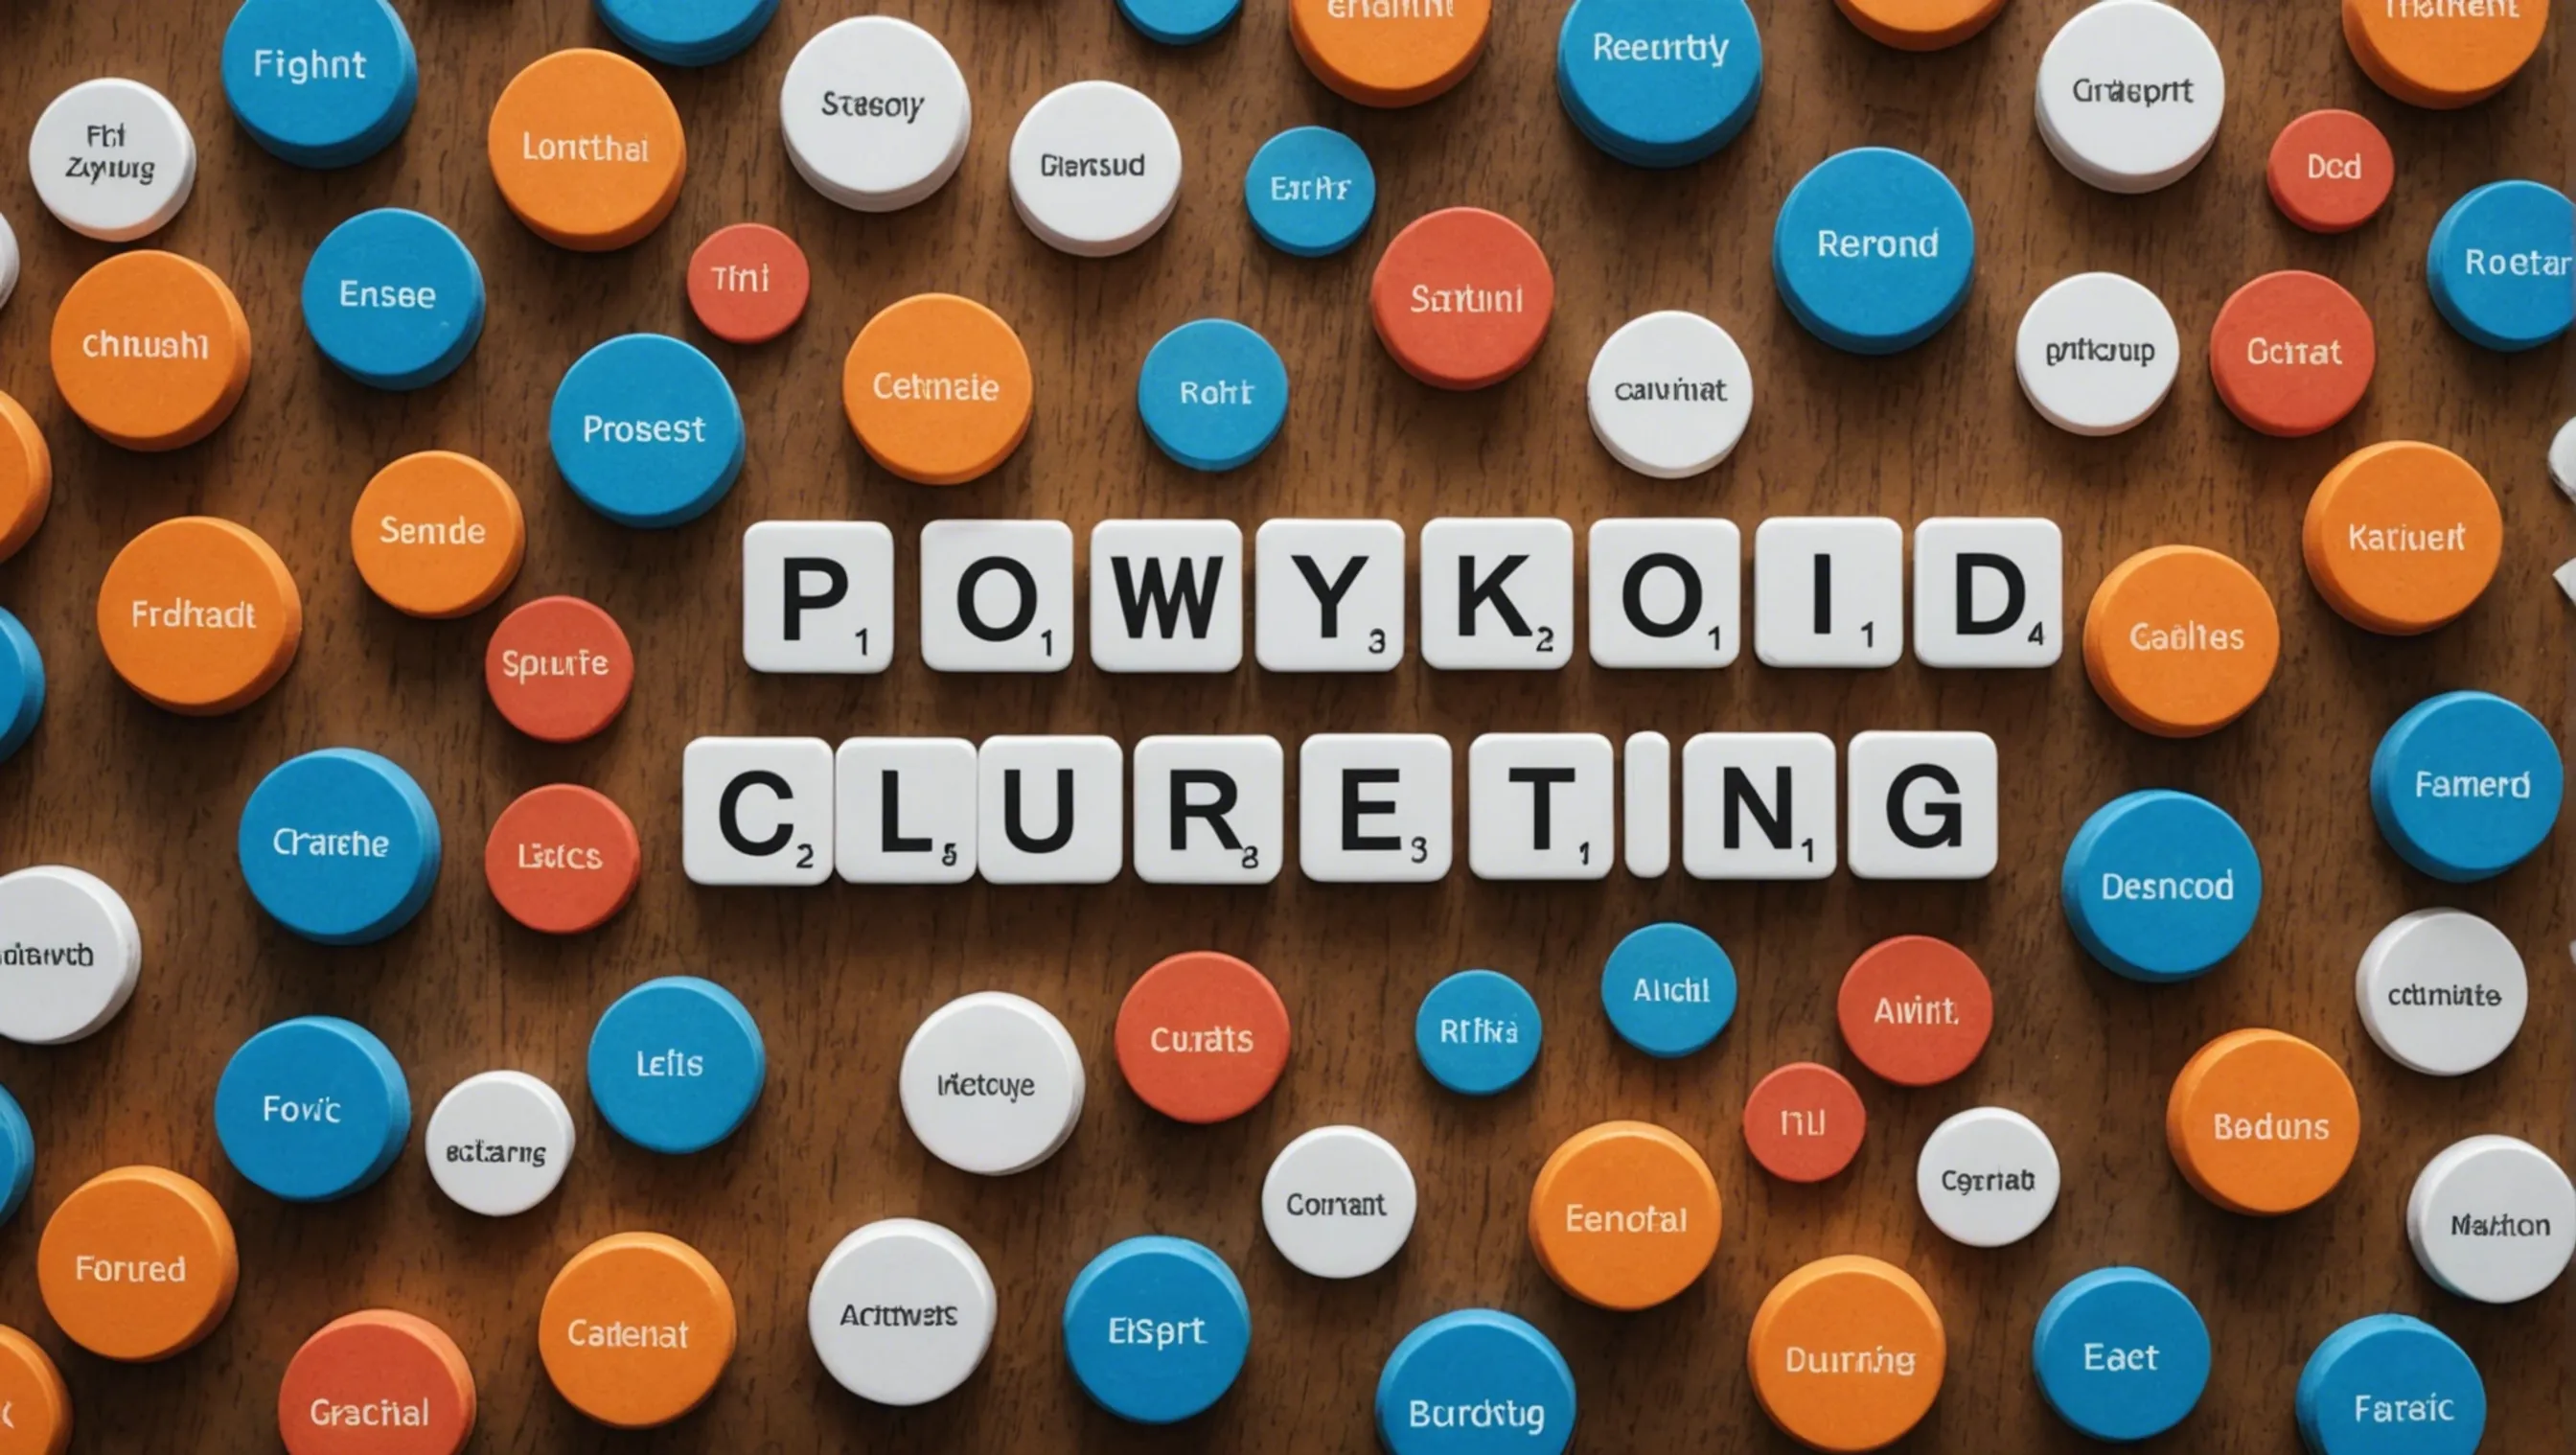 Keyword grouping and clustering